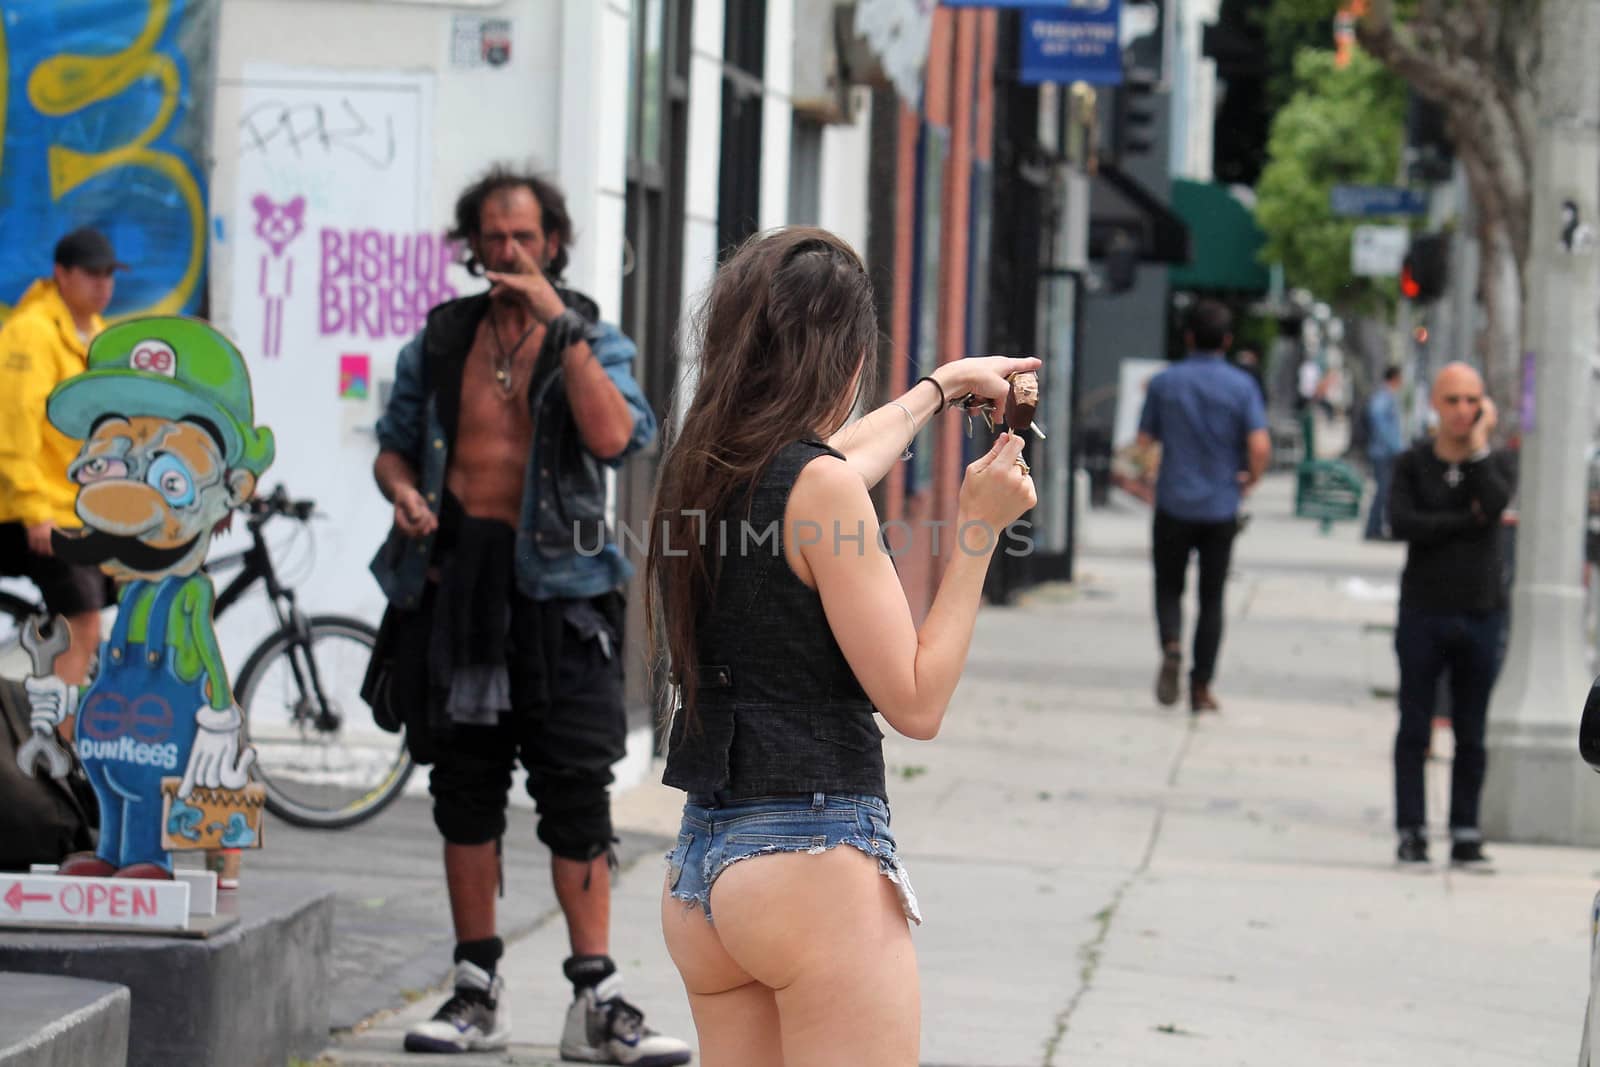 Alicia Arden the "Baywatch" actress is spotted wearing a barely-there outfit while shopping on Melrose Ave. on a hot day, and has a run-in with a homless man, Los Angeles, CA 05-03-17/ImageCollect by ImageCollect